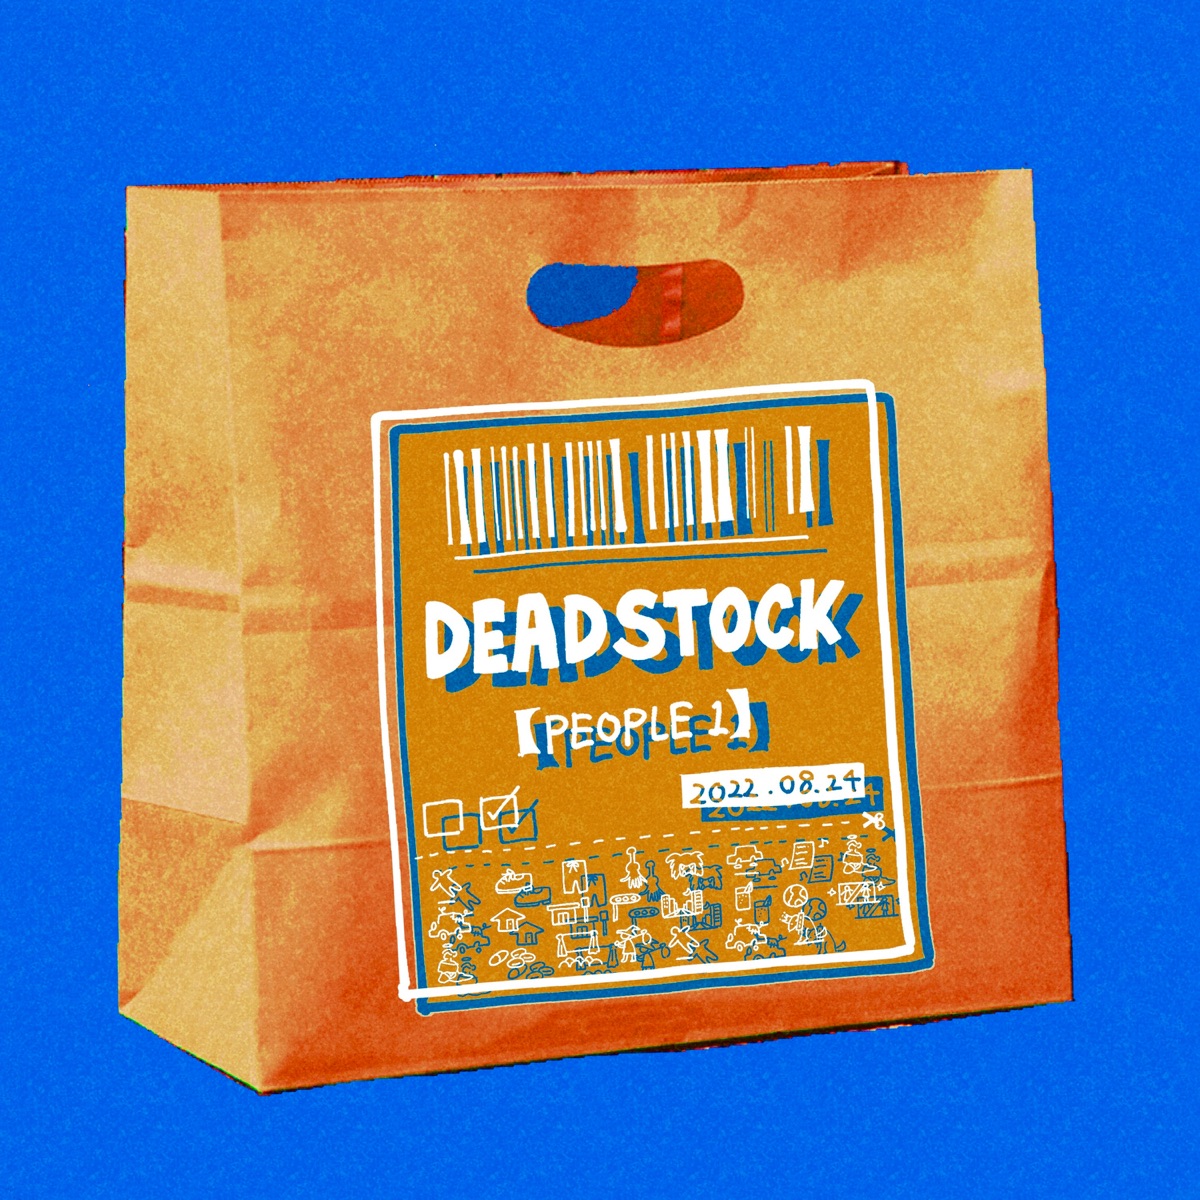 『PEOPLE 1 - Deadstock (feat. きのぽっぽ)』収録の『Deadstock (feat. きのぽっぽ)』ジャケット